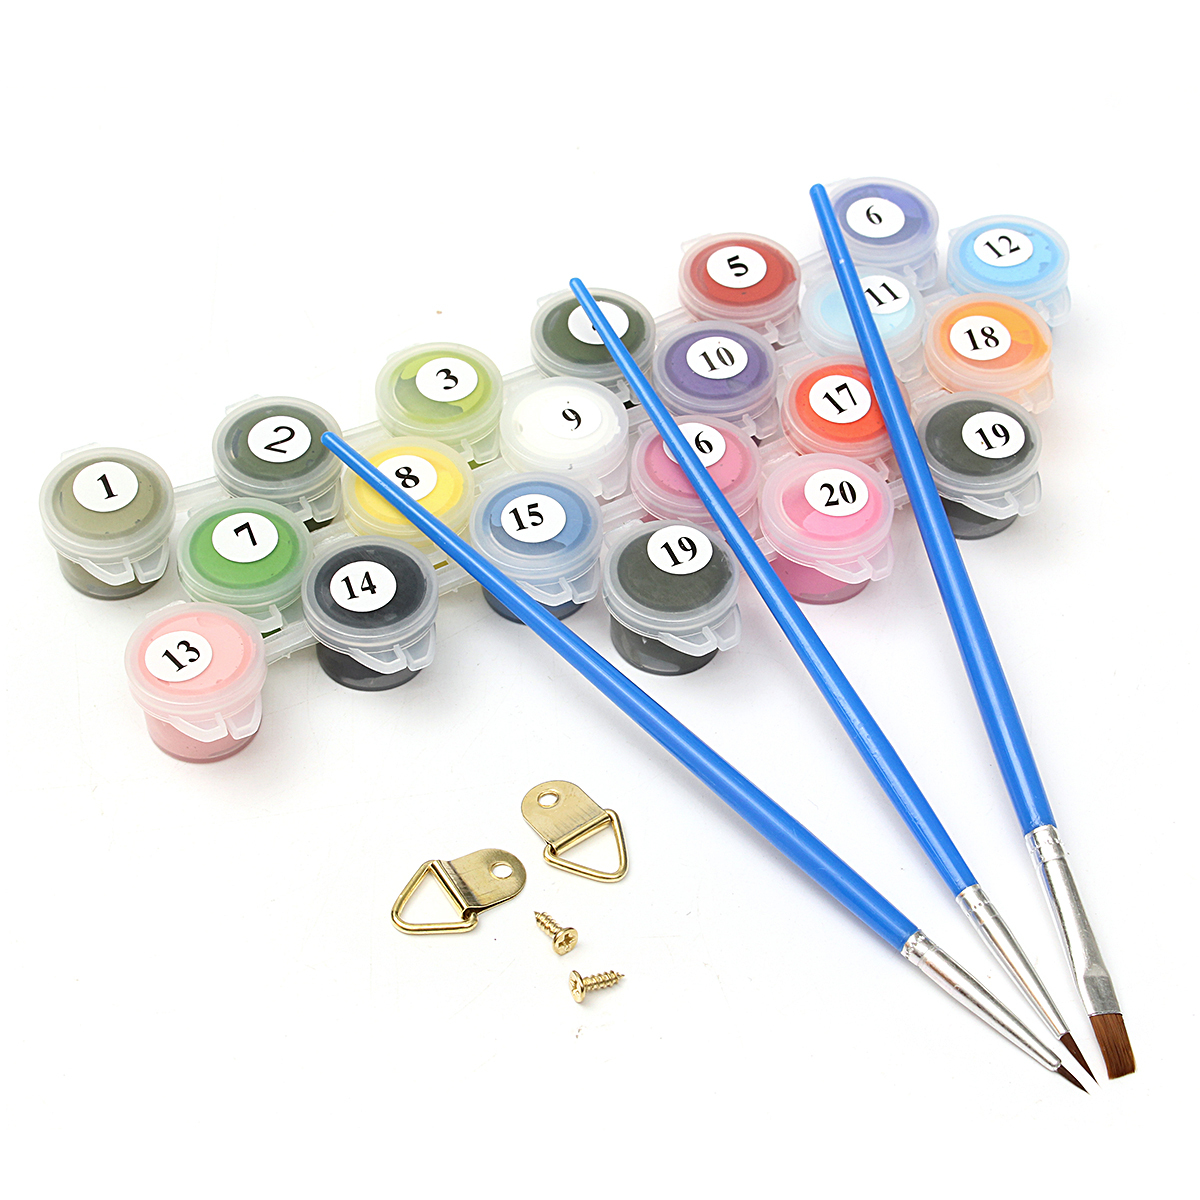 Multicolor-Deer-Oil-Painting-Set-By-Number-Kit-DIY-Pigment-Painting-Art-Hand-Craft-Tool-1733486-5